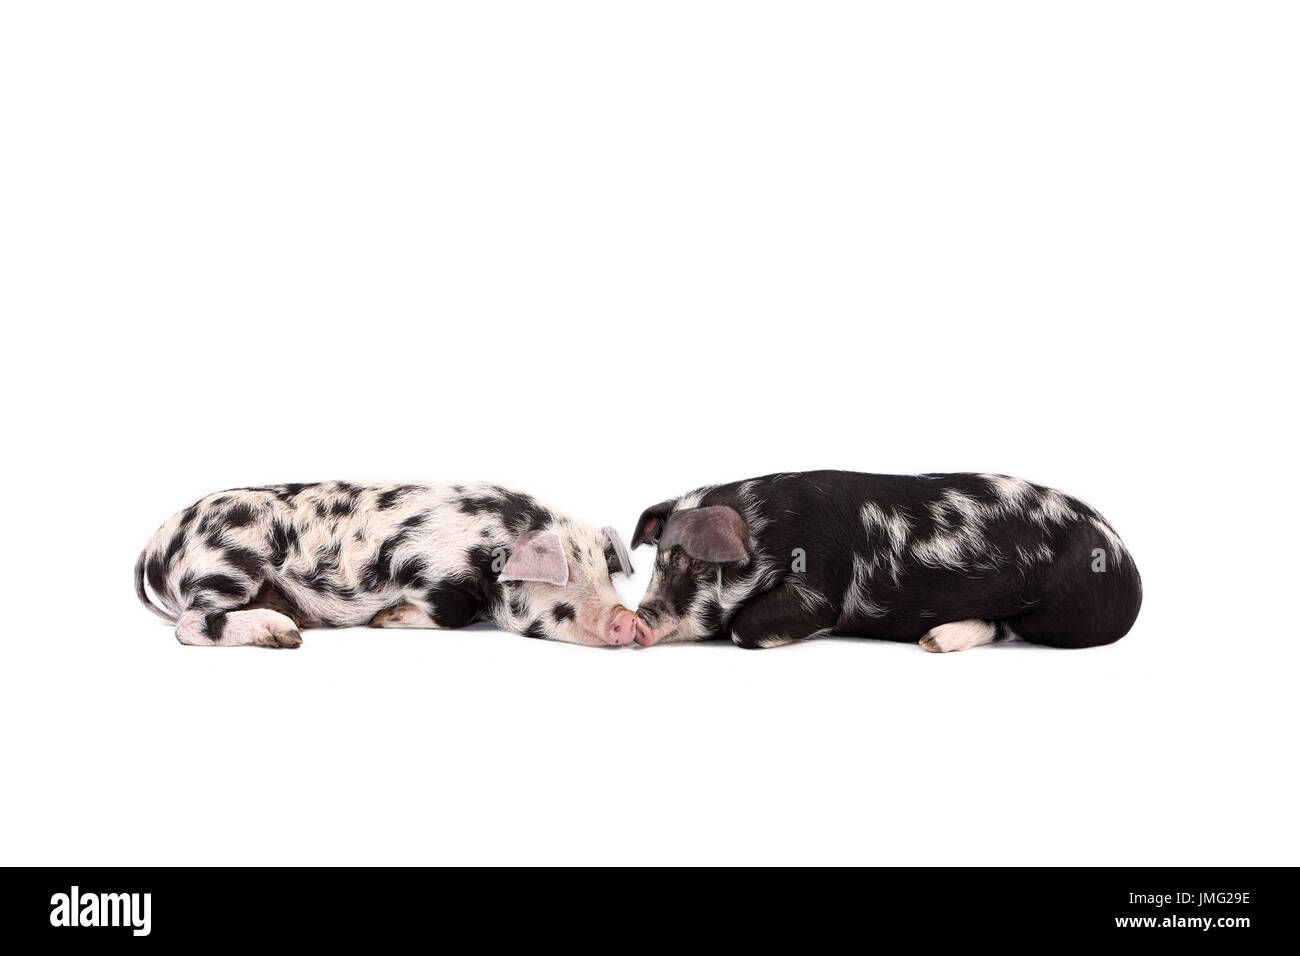 Turopolje Pig. Two piglets lying nose to nose. Studio picture against a white background. Germany Stock Photo